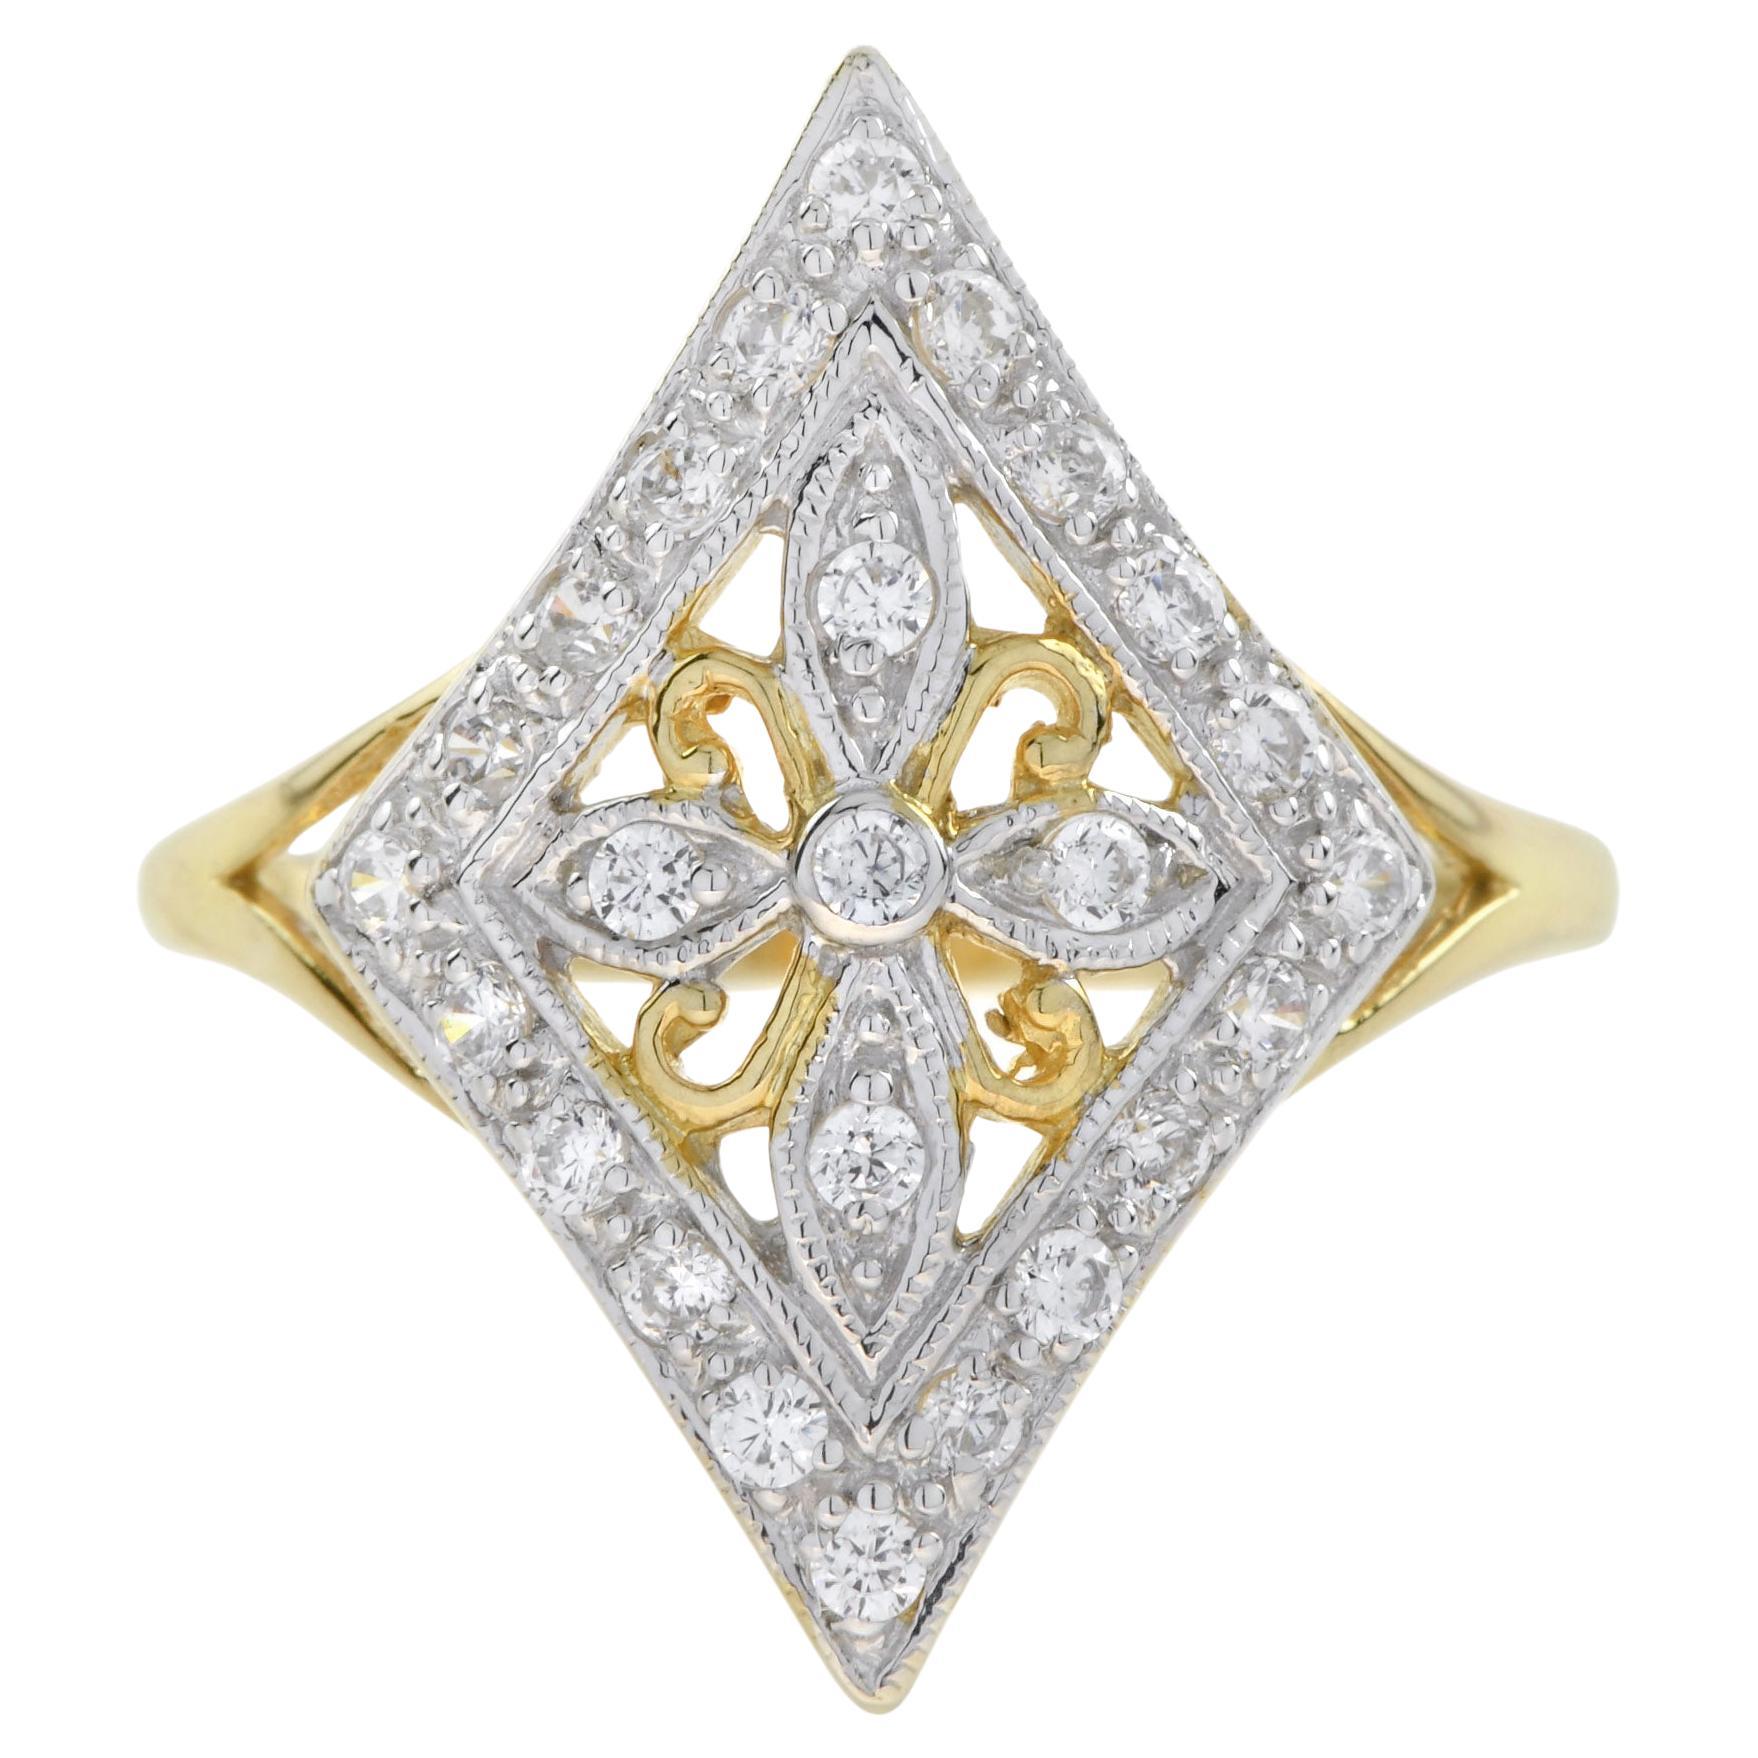 For Sale:  Vintage Style Diamond Floral Filigree Ring in 14K Yellow Gold